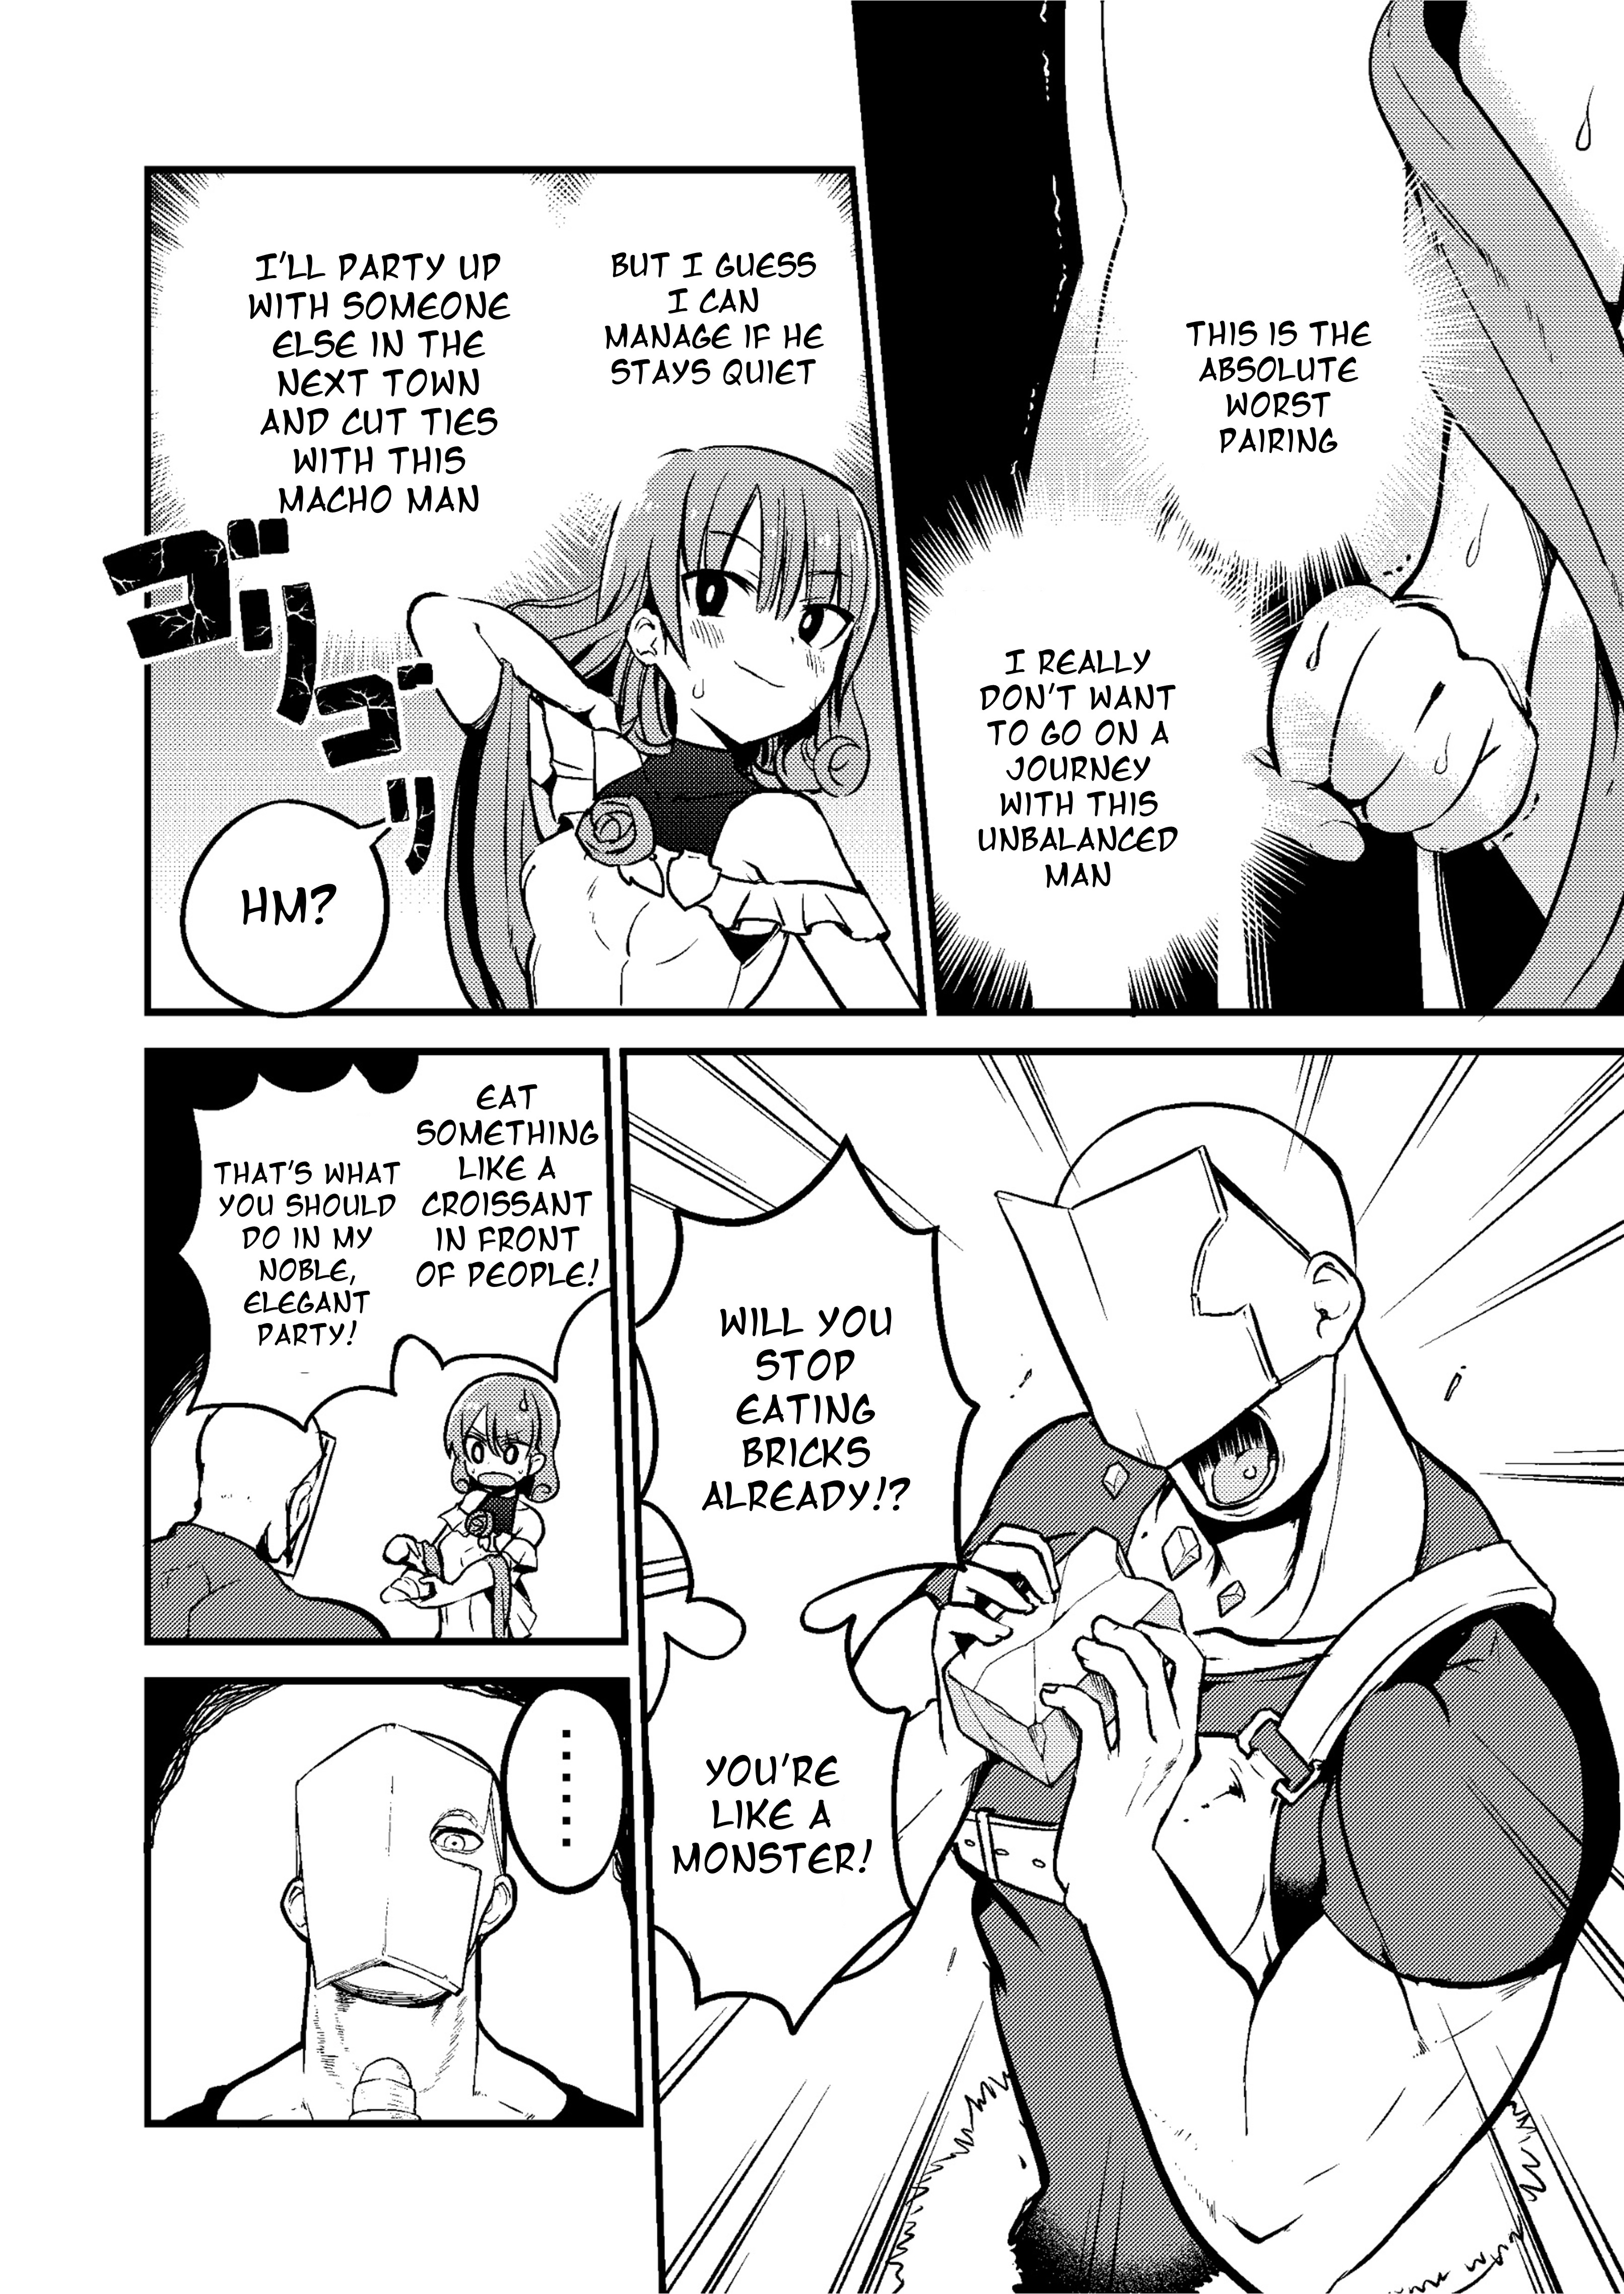 Shiro Madoushi Syrup-San Vol.1 Chapter 15: White Mage Chiffon And Compatibility - Picture 2